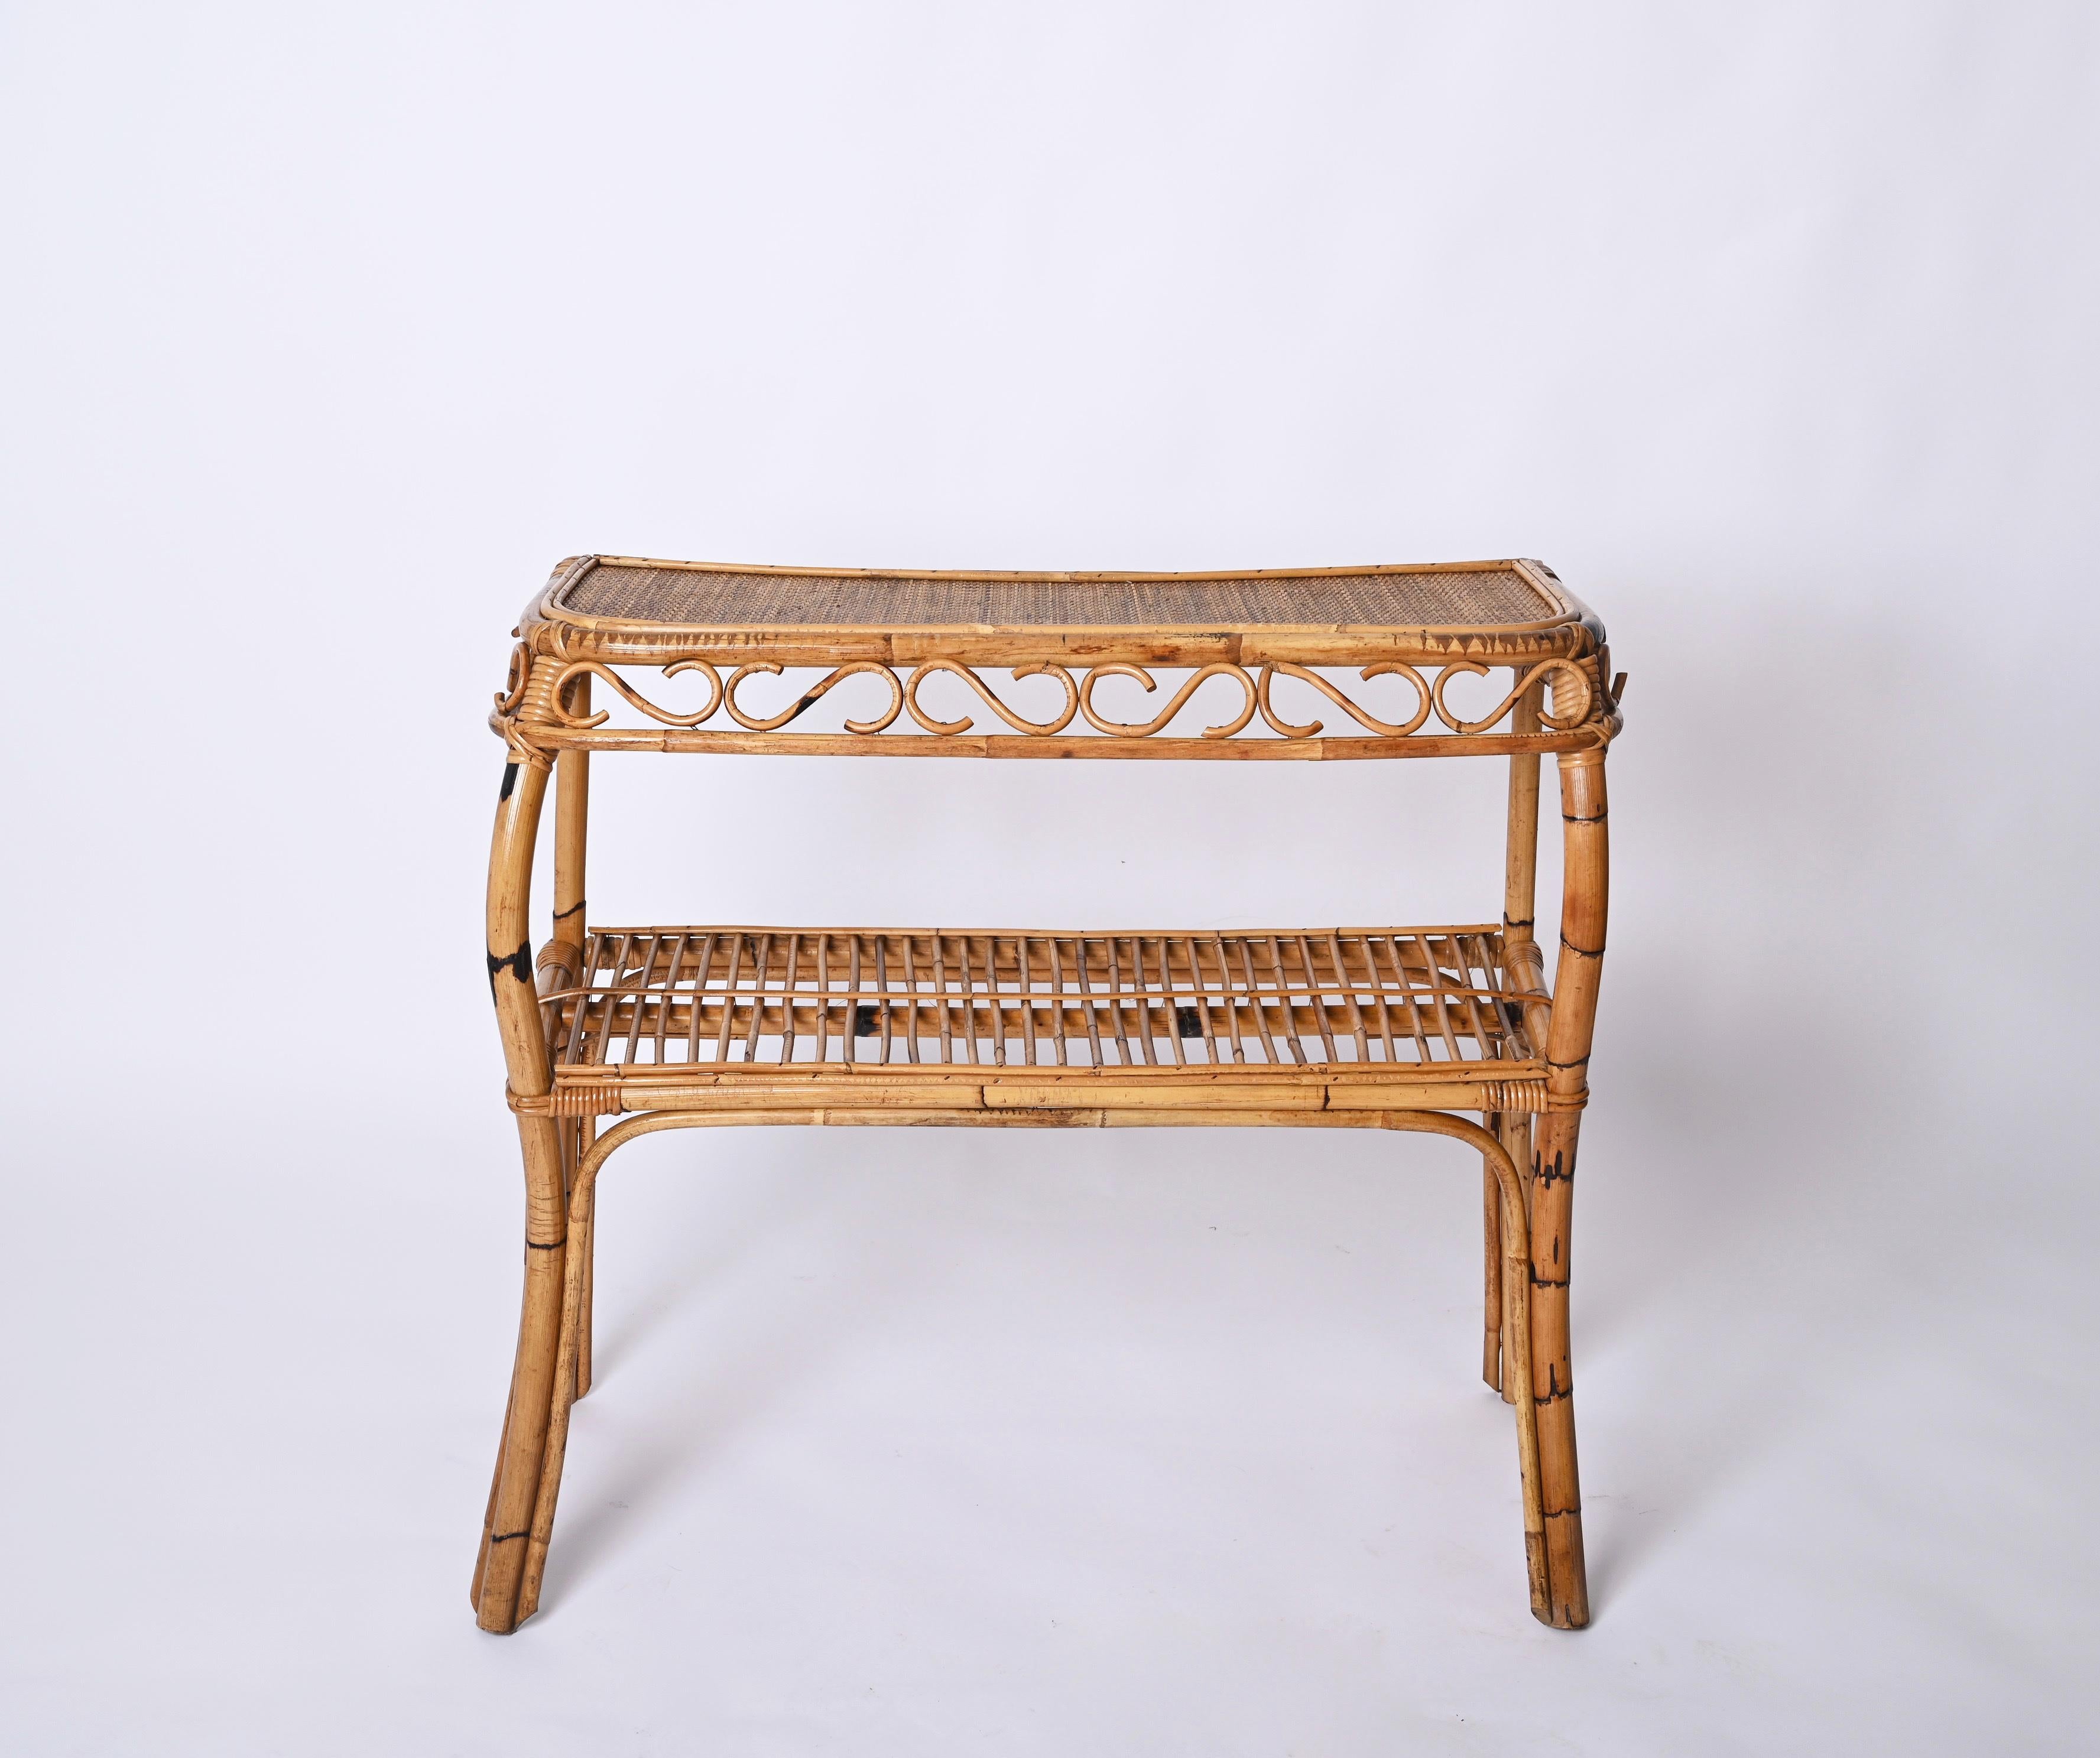 Midcentury Bamboo and Rattan Console Table, Franco Albini, Italy, 1960s For Sale 10